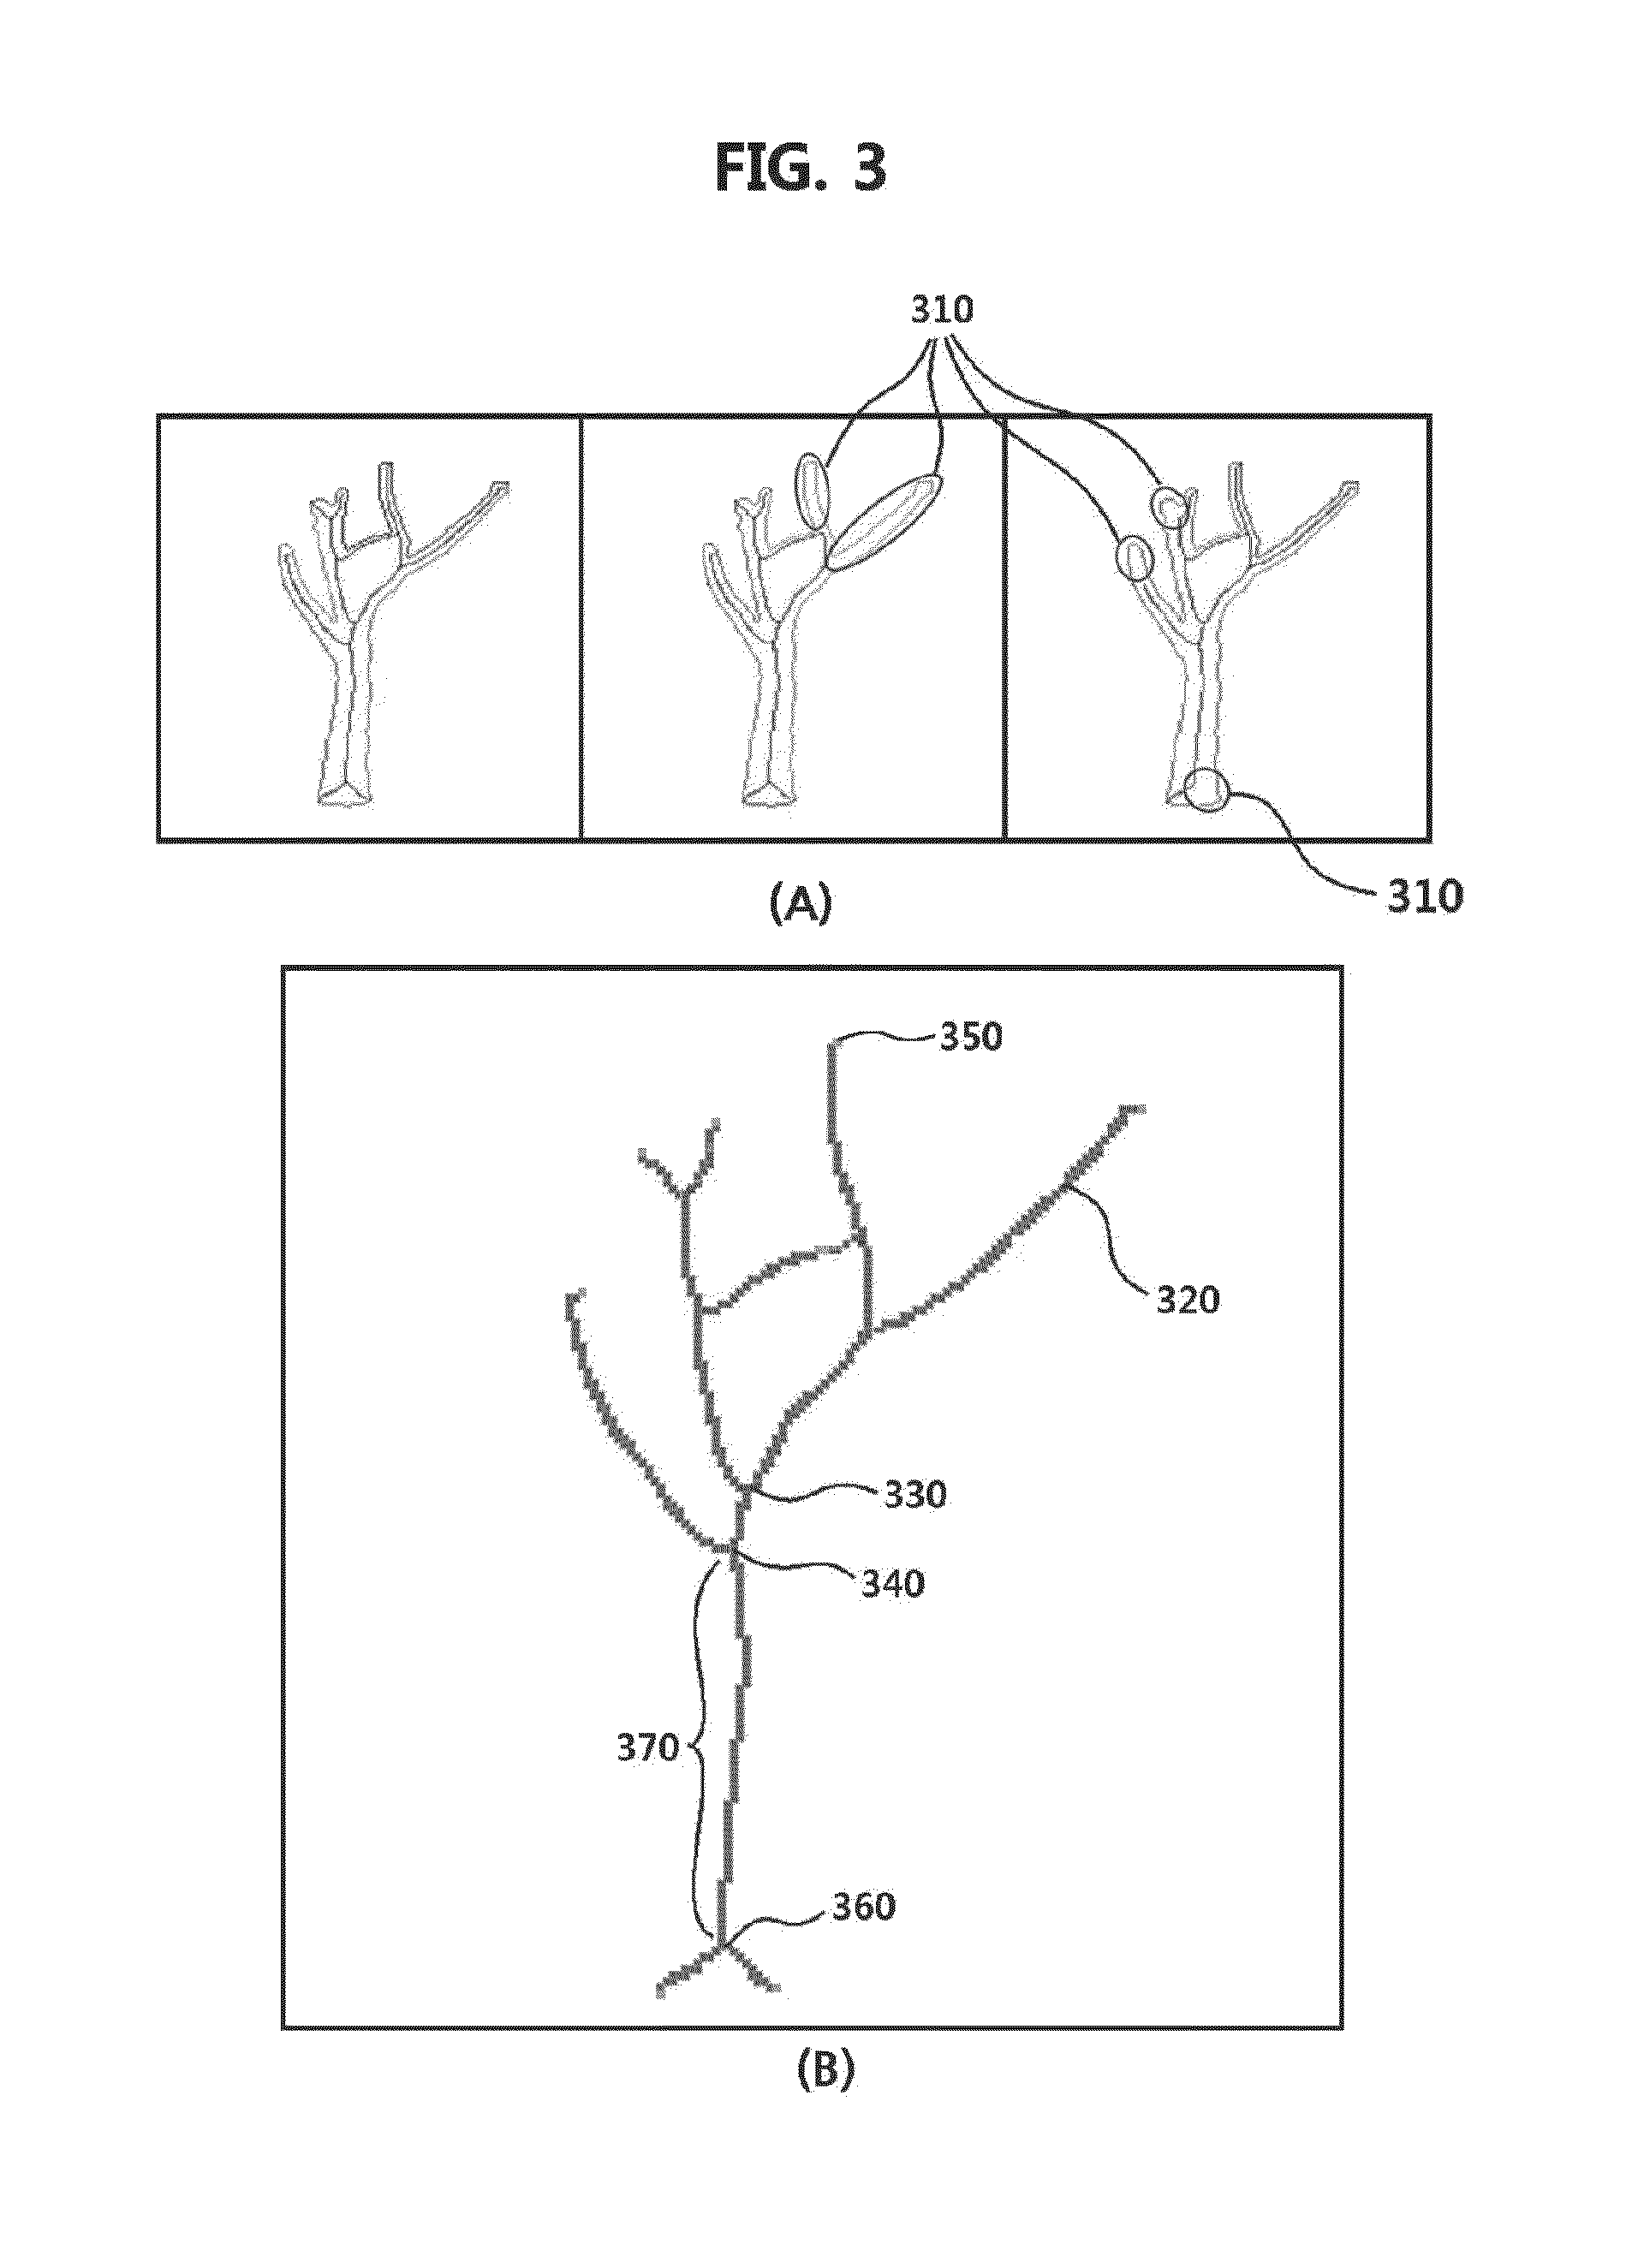 Tree model and forest model generating method and apparatus